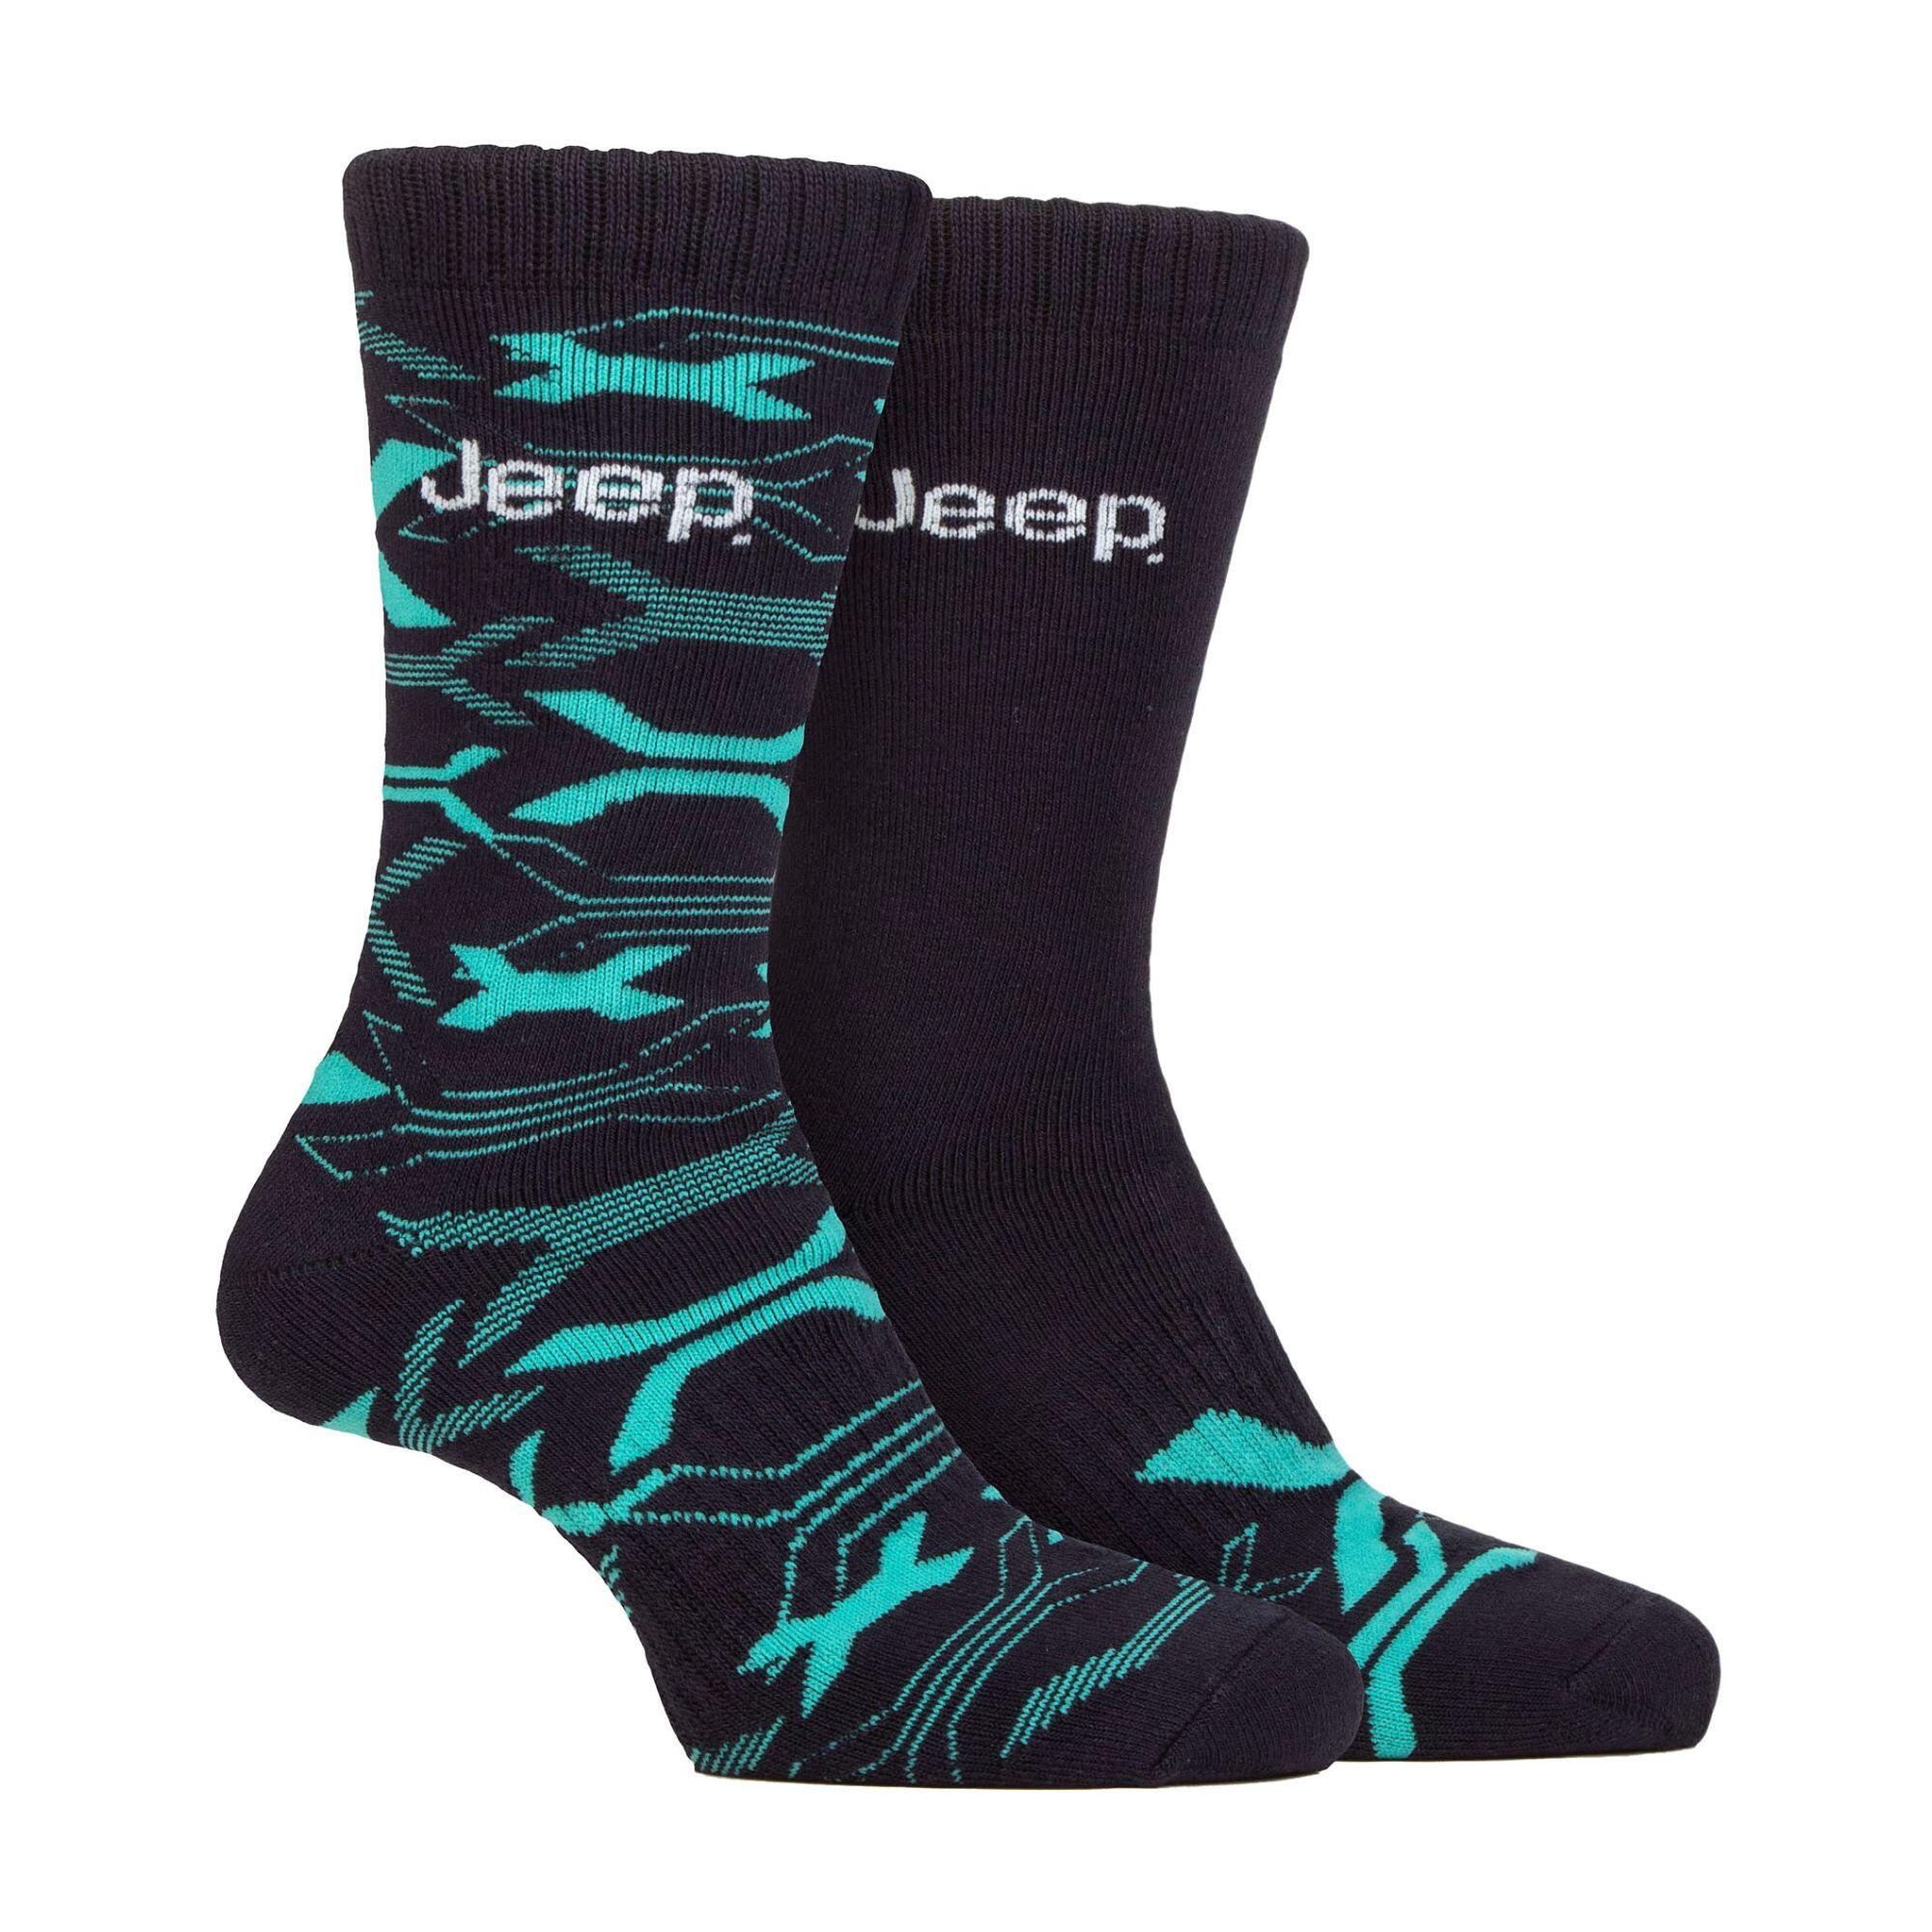 JEEP Mens Bamboo Soft Breathable Work Boot Socks